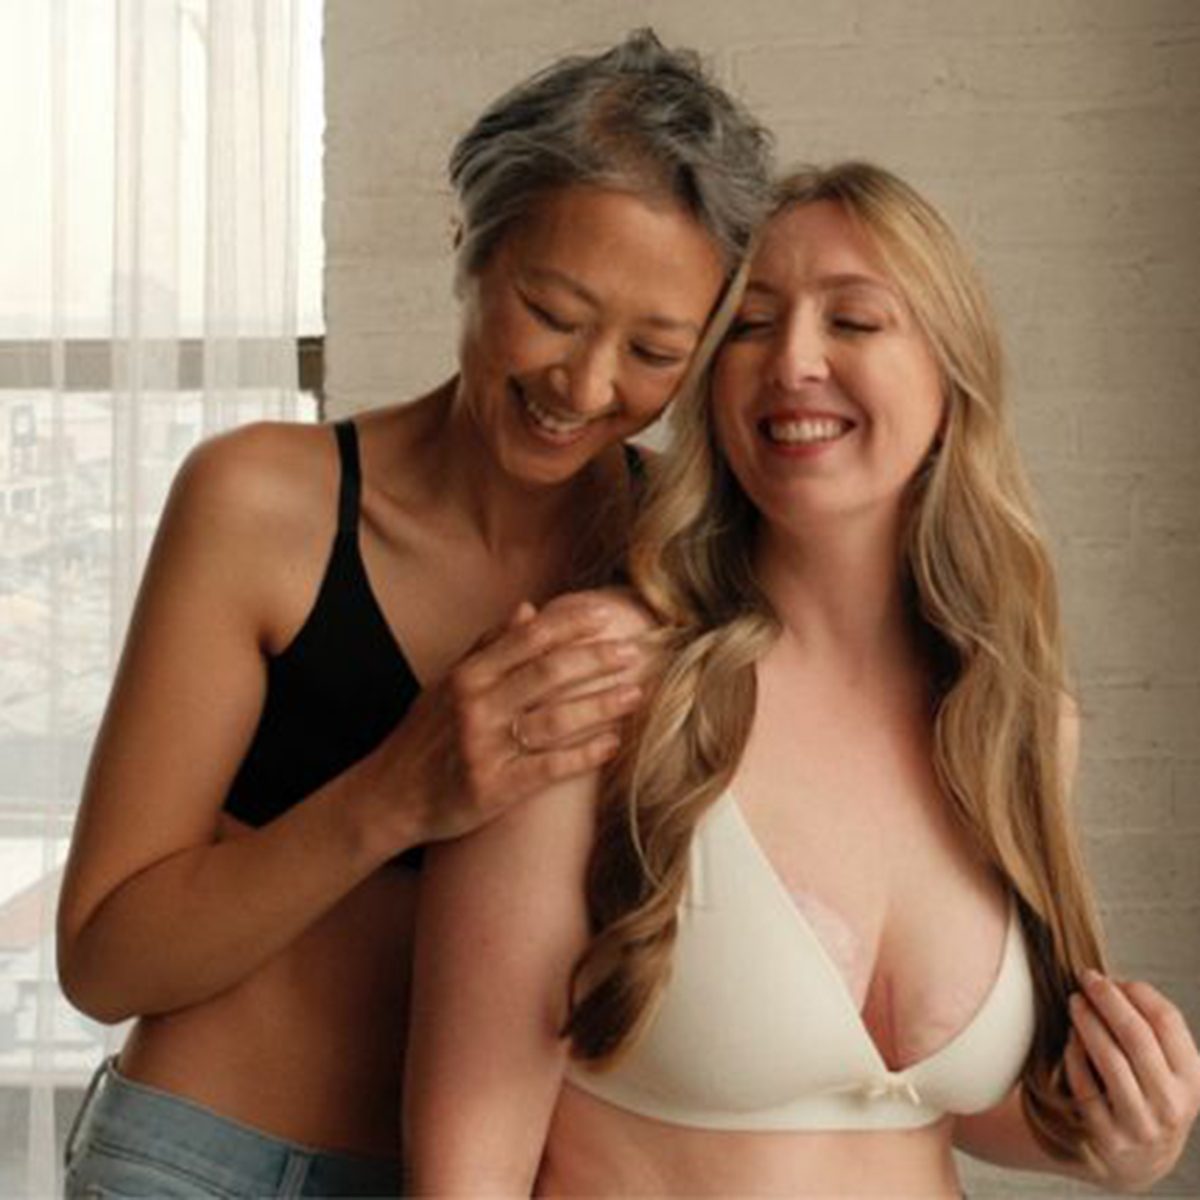 This Mom Couldn't Find a Sports Bra That Does What It's Supposed